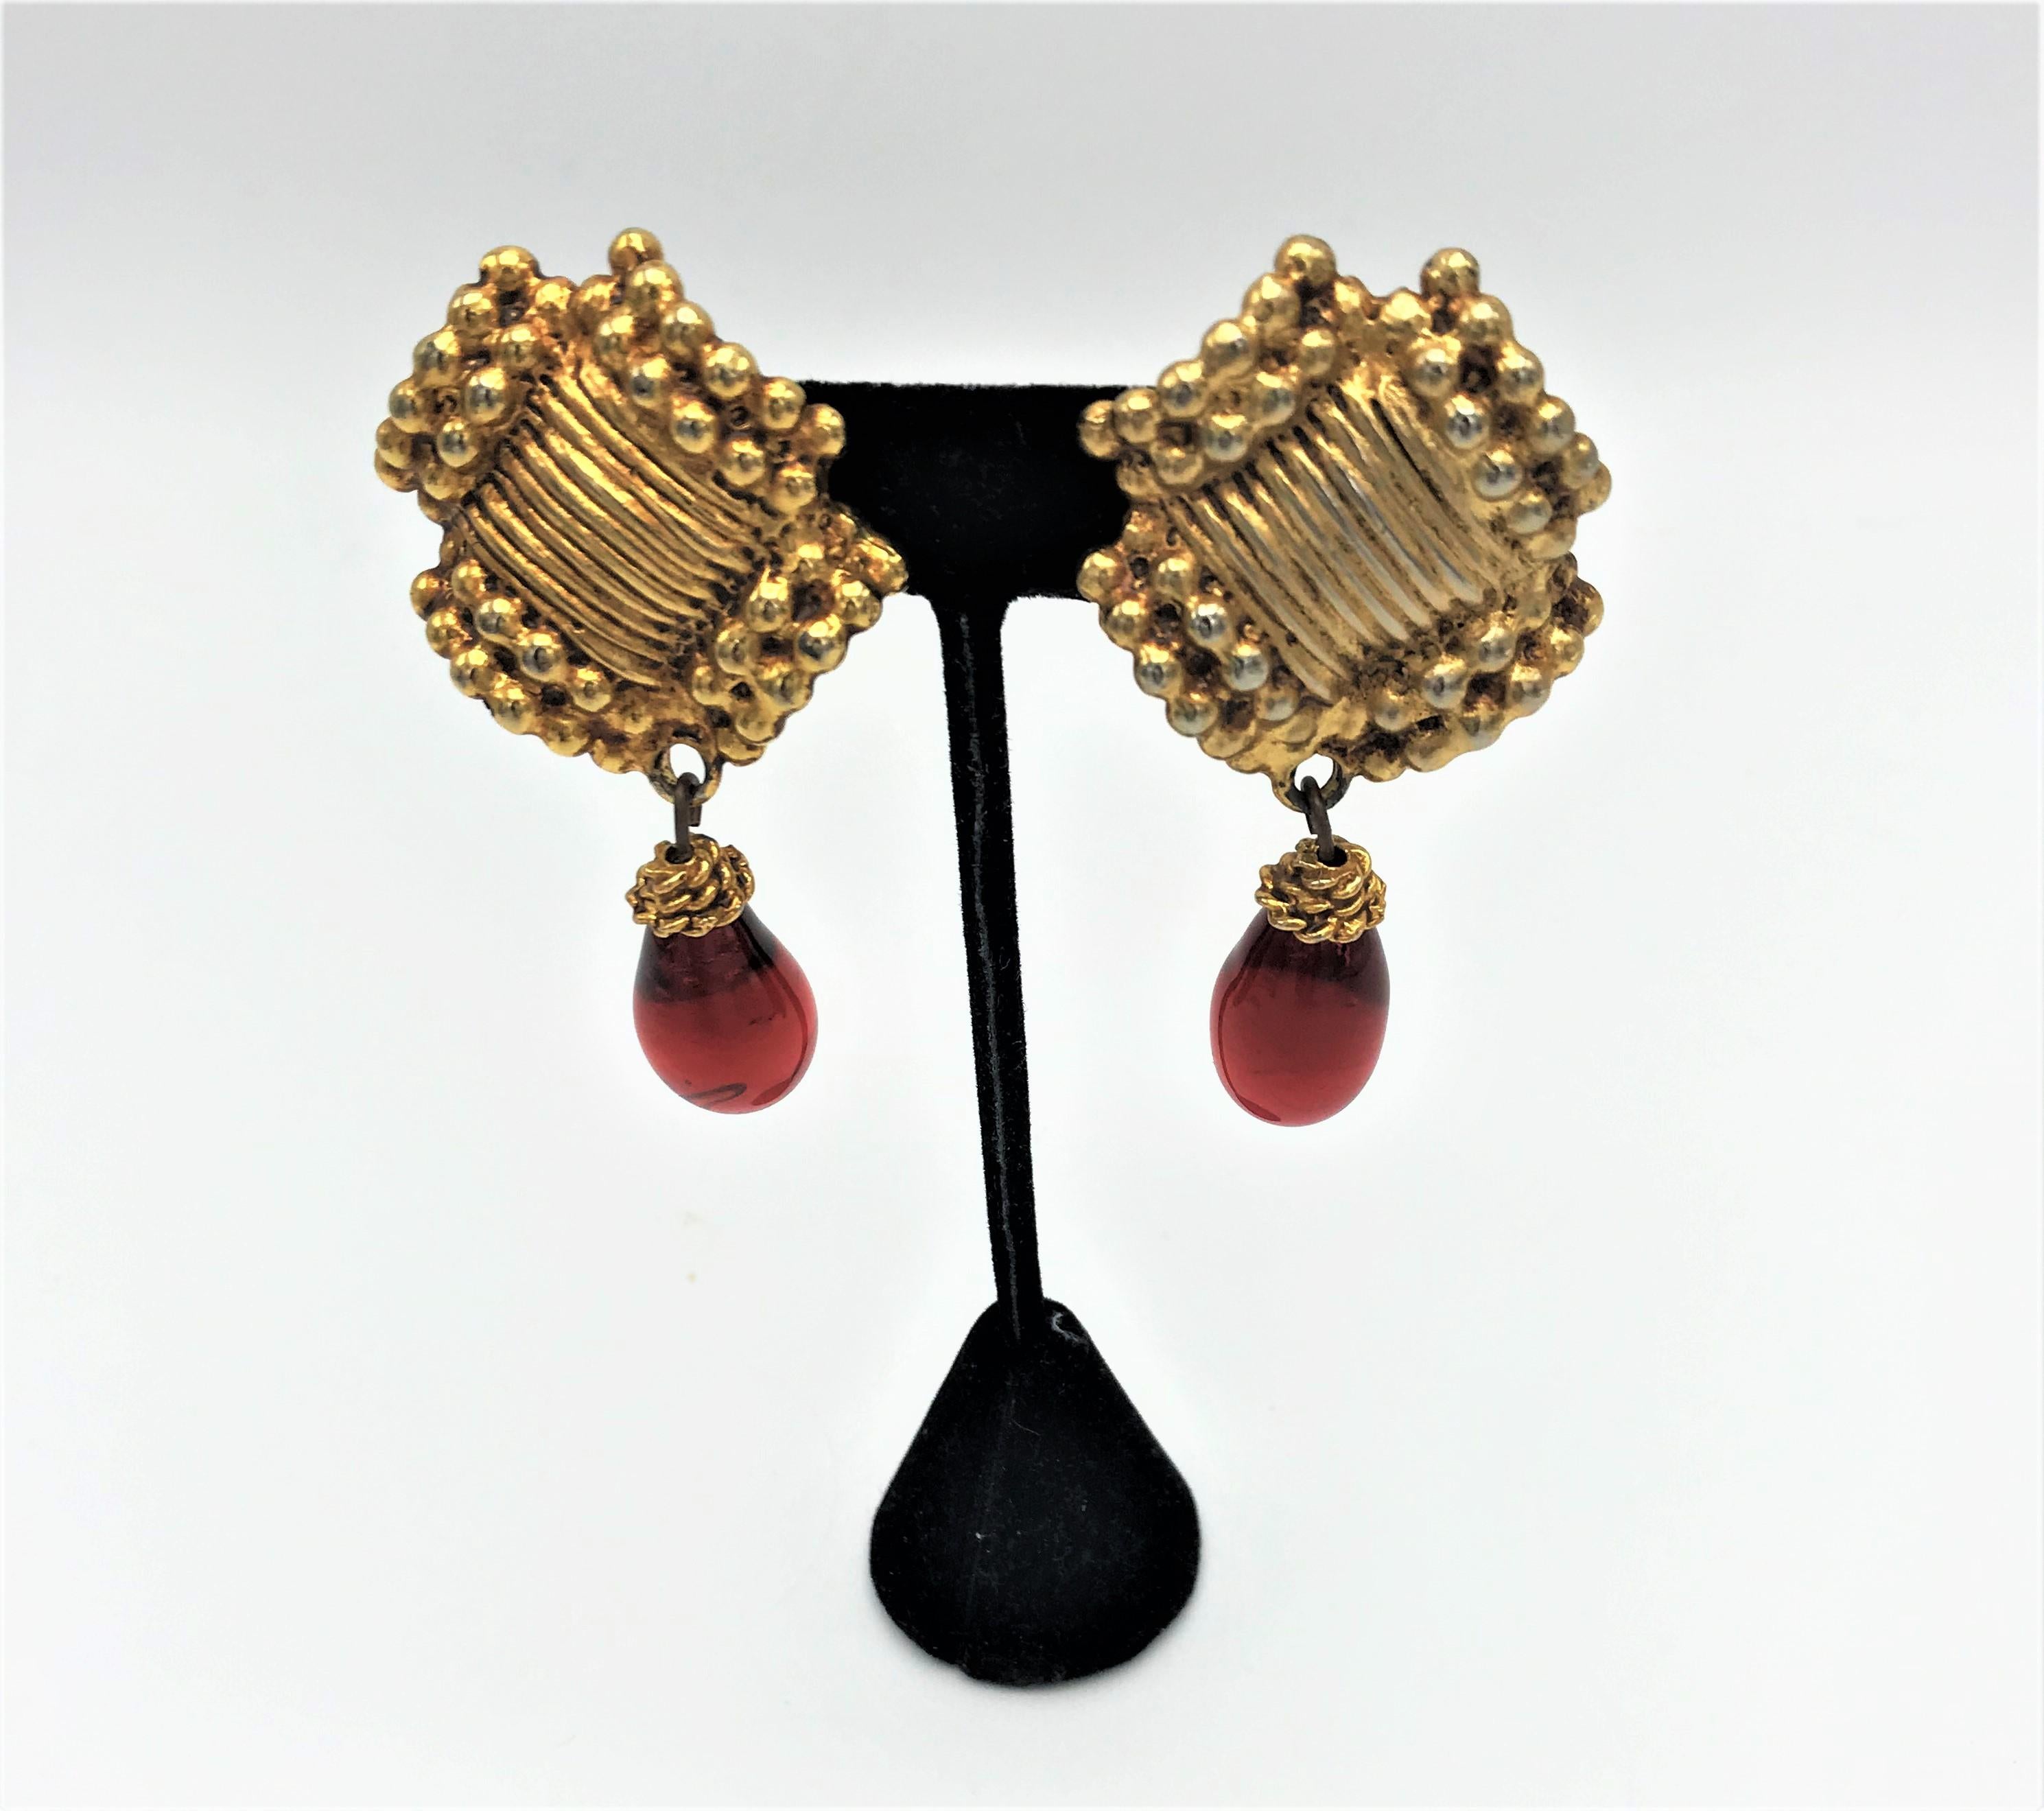  Vintage clip-on earrings from ANTIGONA PARIS 1970s, gold-plated with red drops For Sale 1